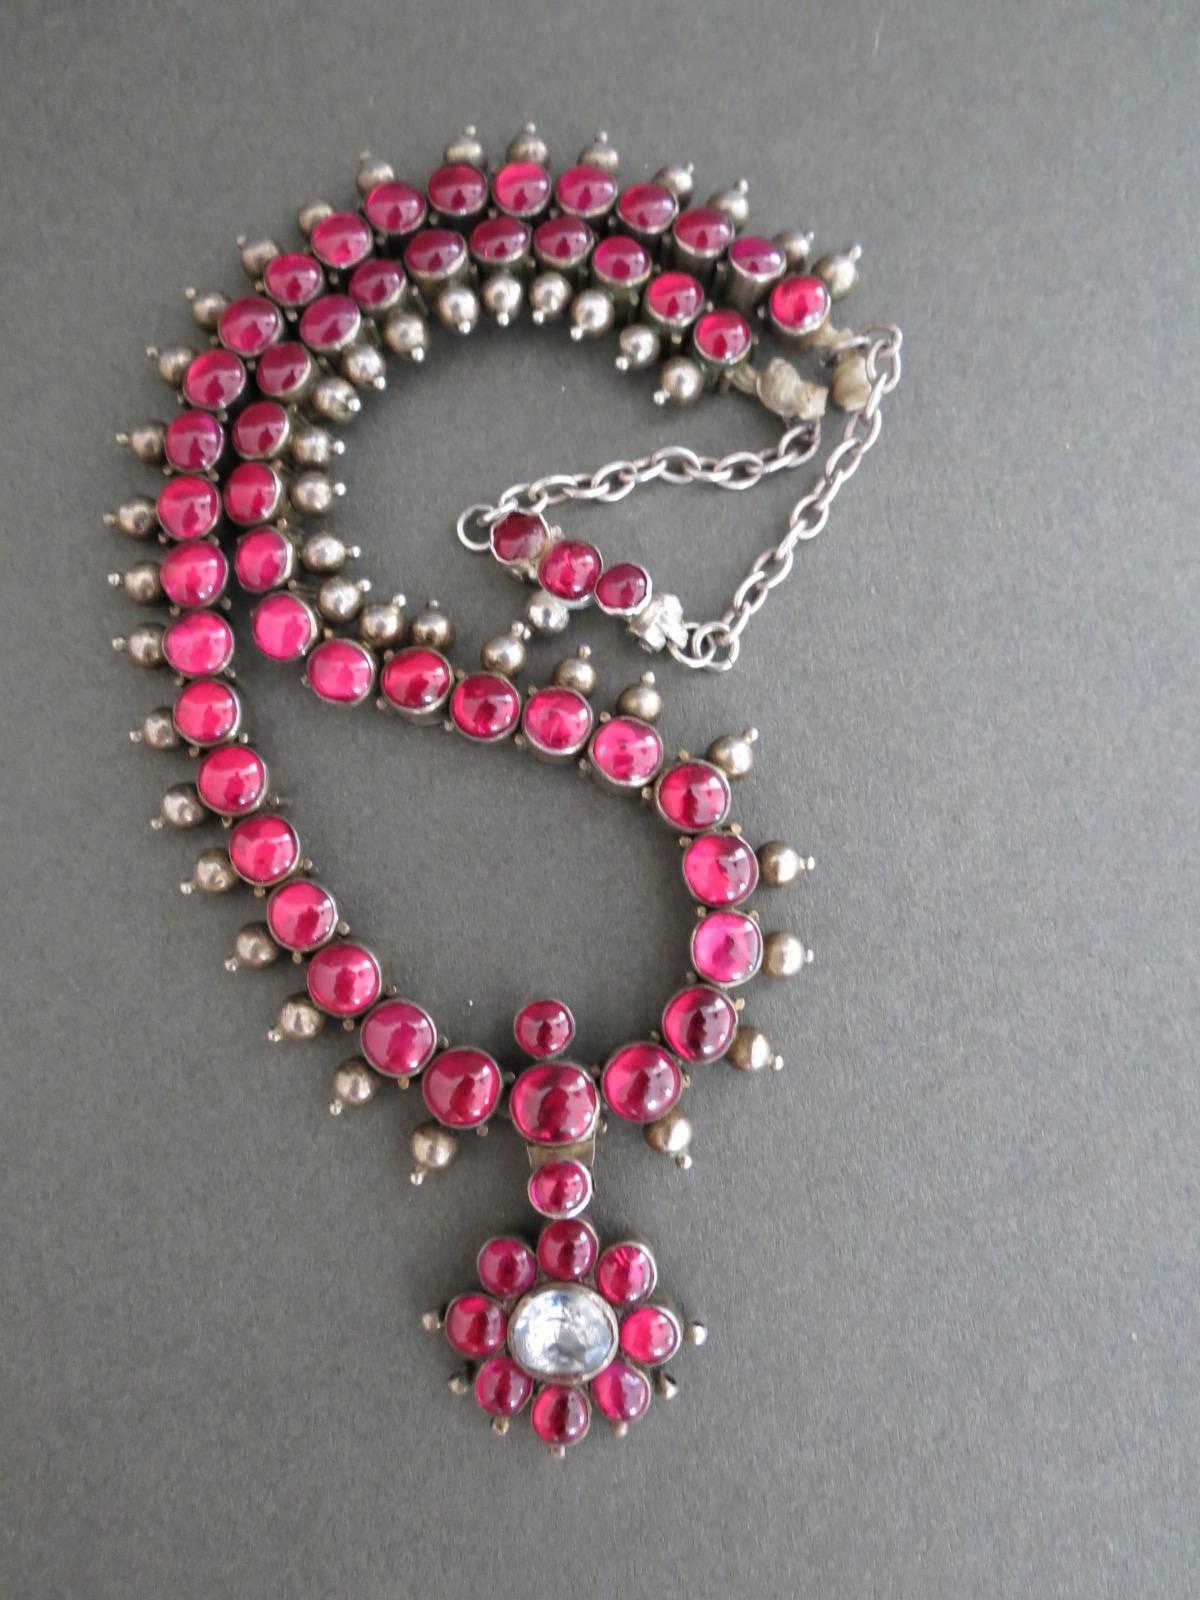 Vintage Indian Wedding Sterling Silver Ruby and Quartz Crystal Necklace. Some age related ware on silver . Silver not hallmarked but tested .
Item Specifics
Length: 42cm (approx 16.50